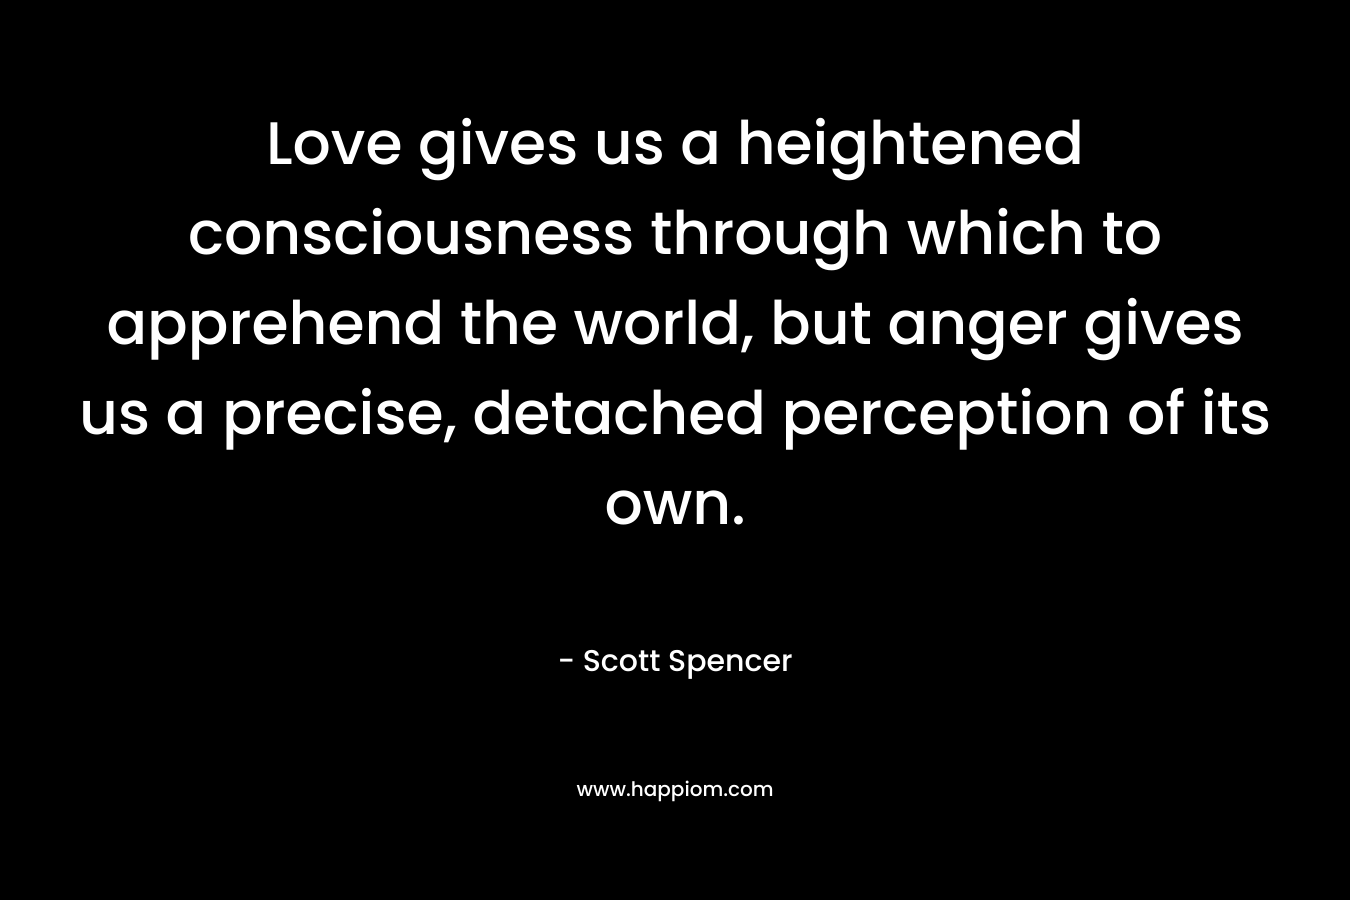 Love gives us a heightened consciousness through which to apprehend the world, but anger gives us a precise, detached perception of its own.